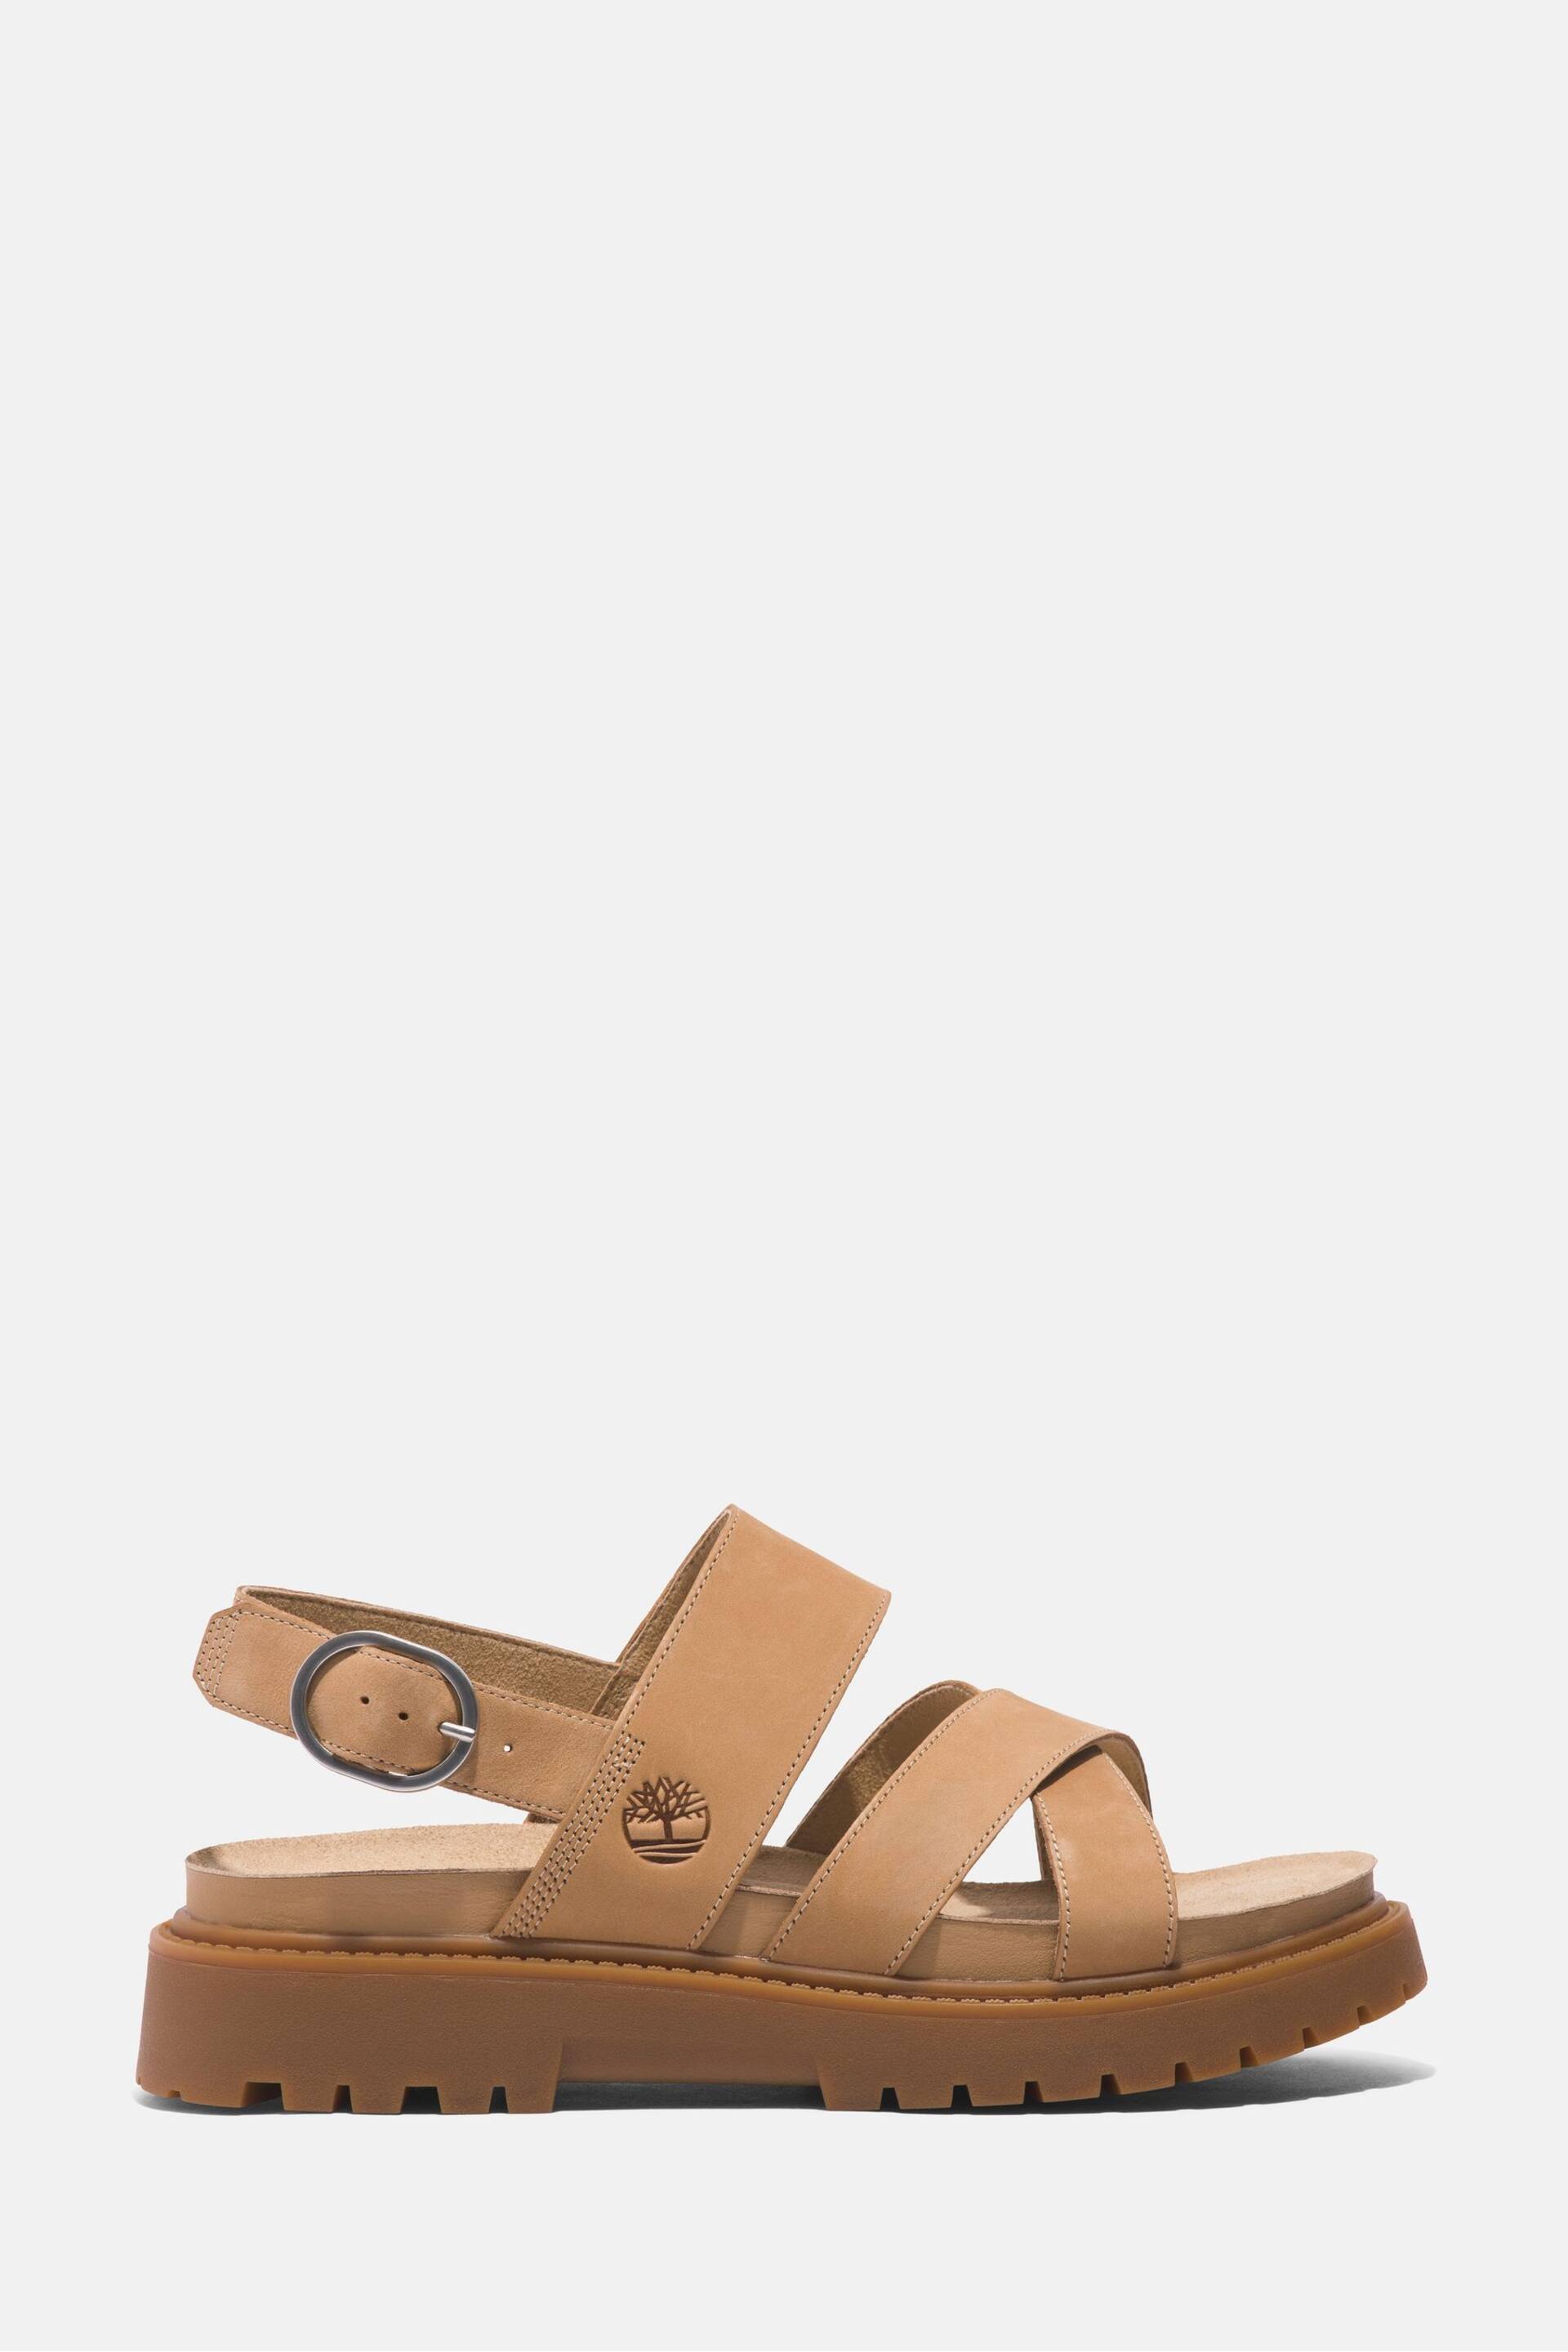 Timberland Cream Clairemont Way Cross Strap Sandals - Image 1 of 7